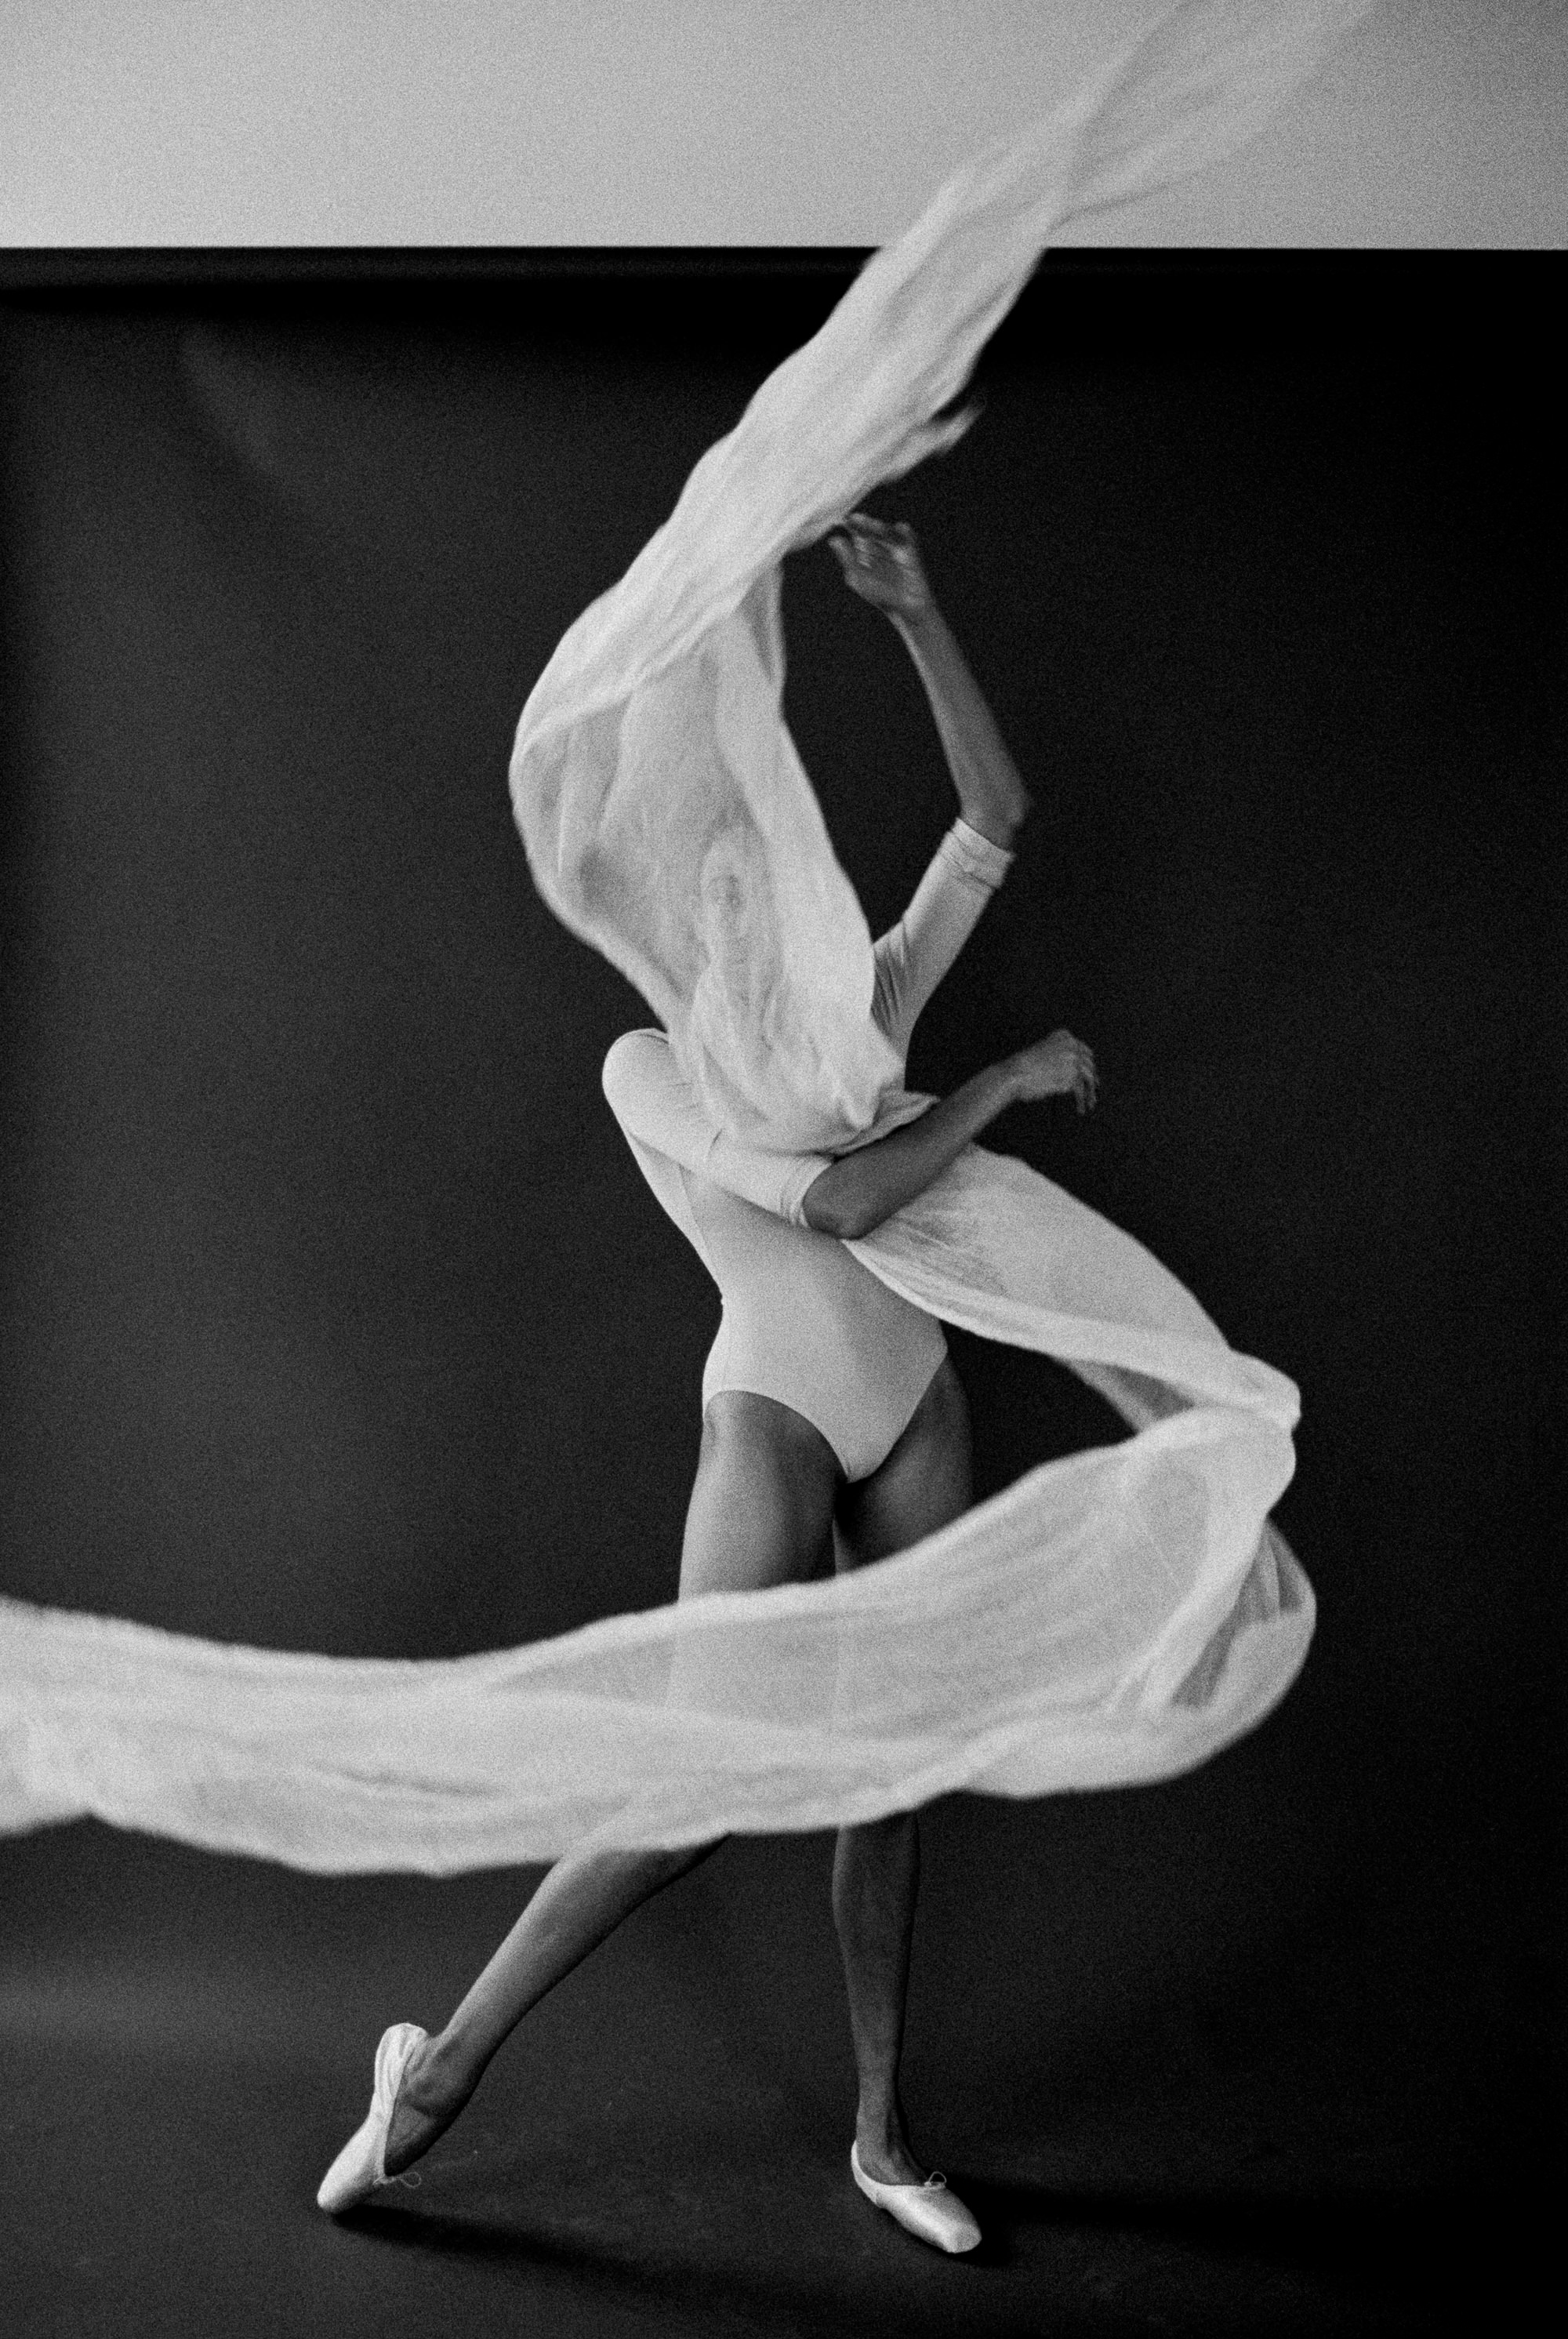 anna-peters-film-photographer-ballet-chapter-series-7-unearthing.tc.jpg